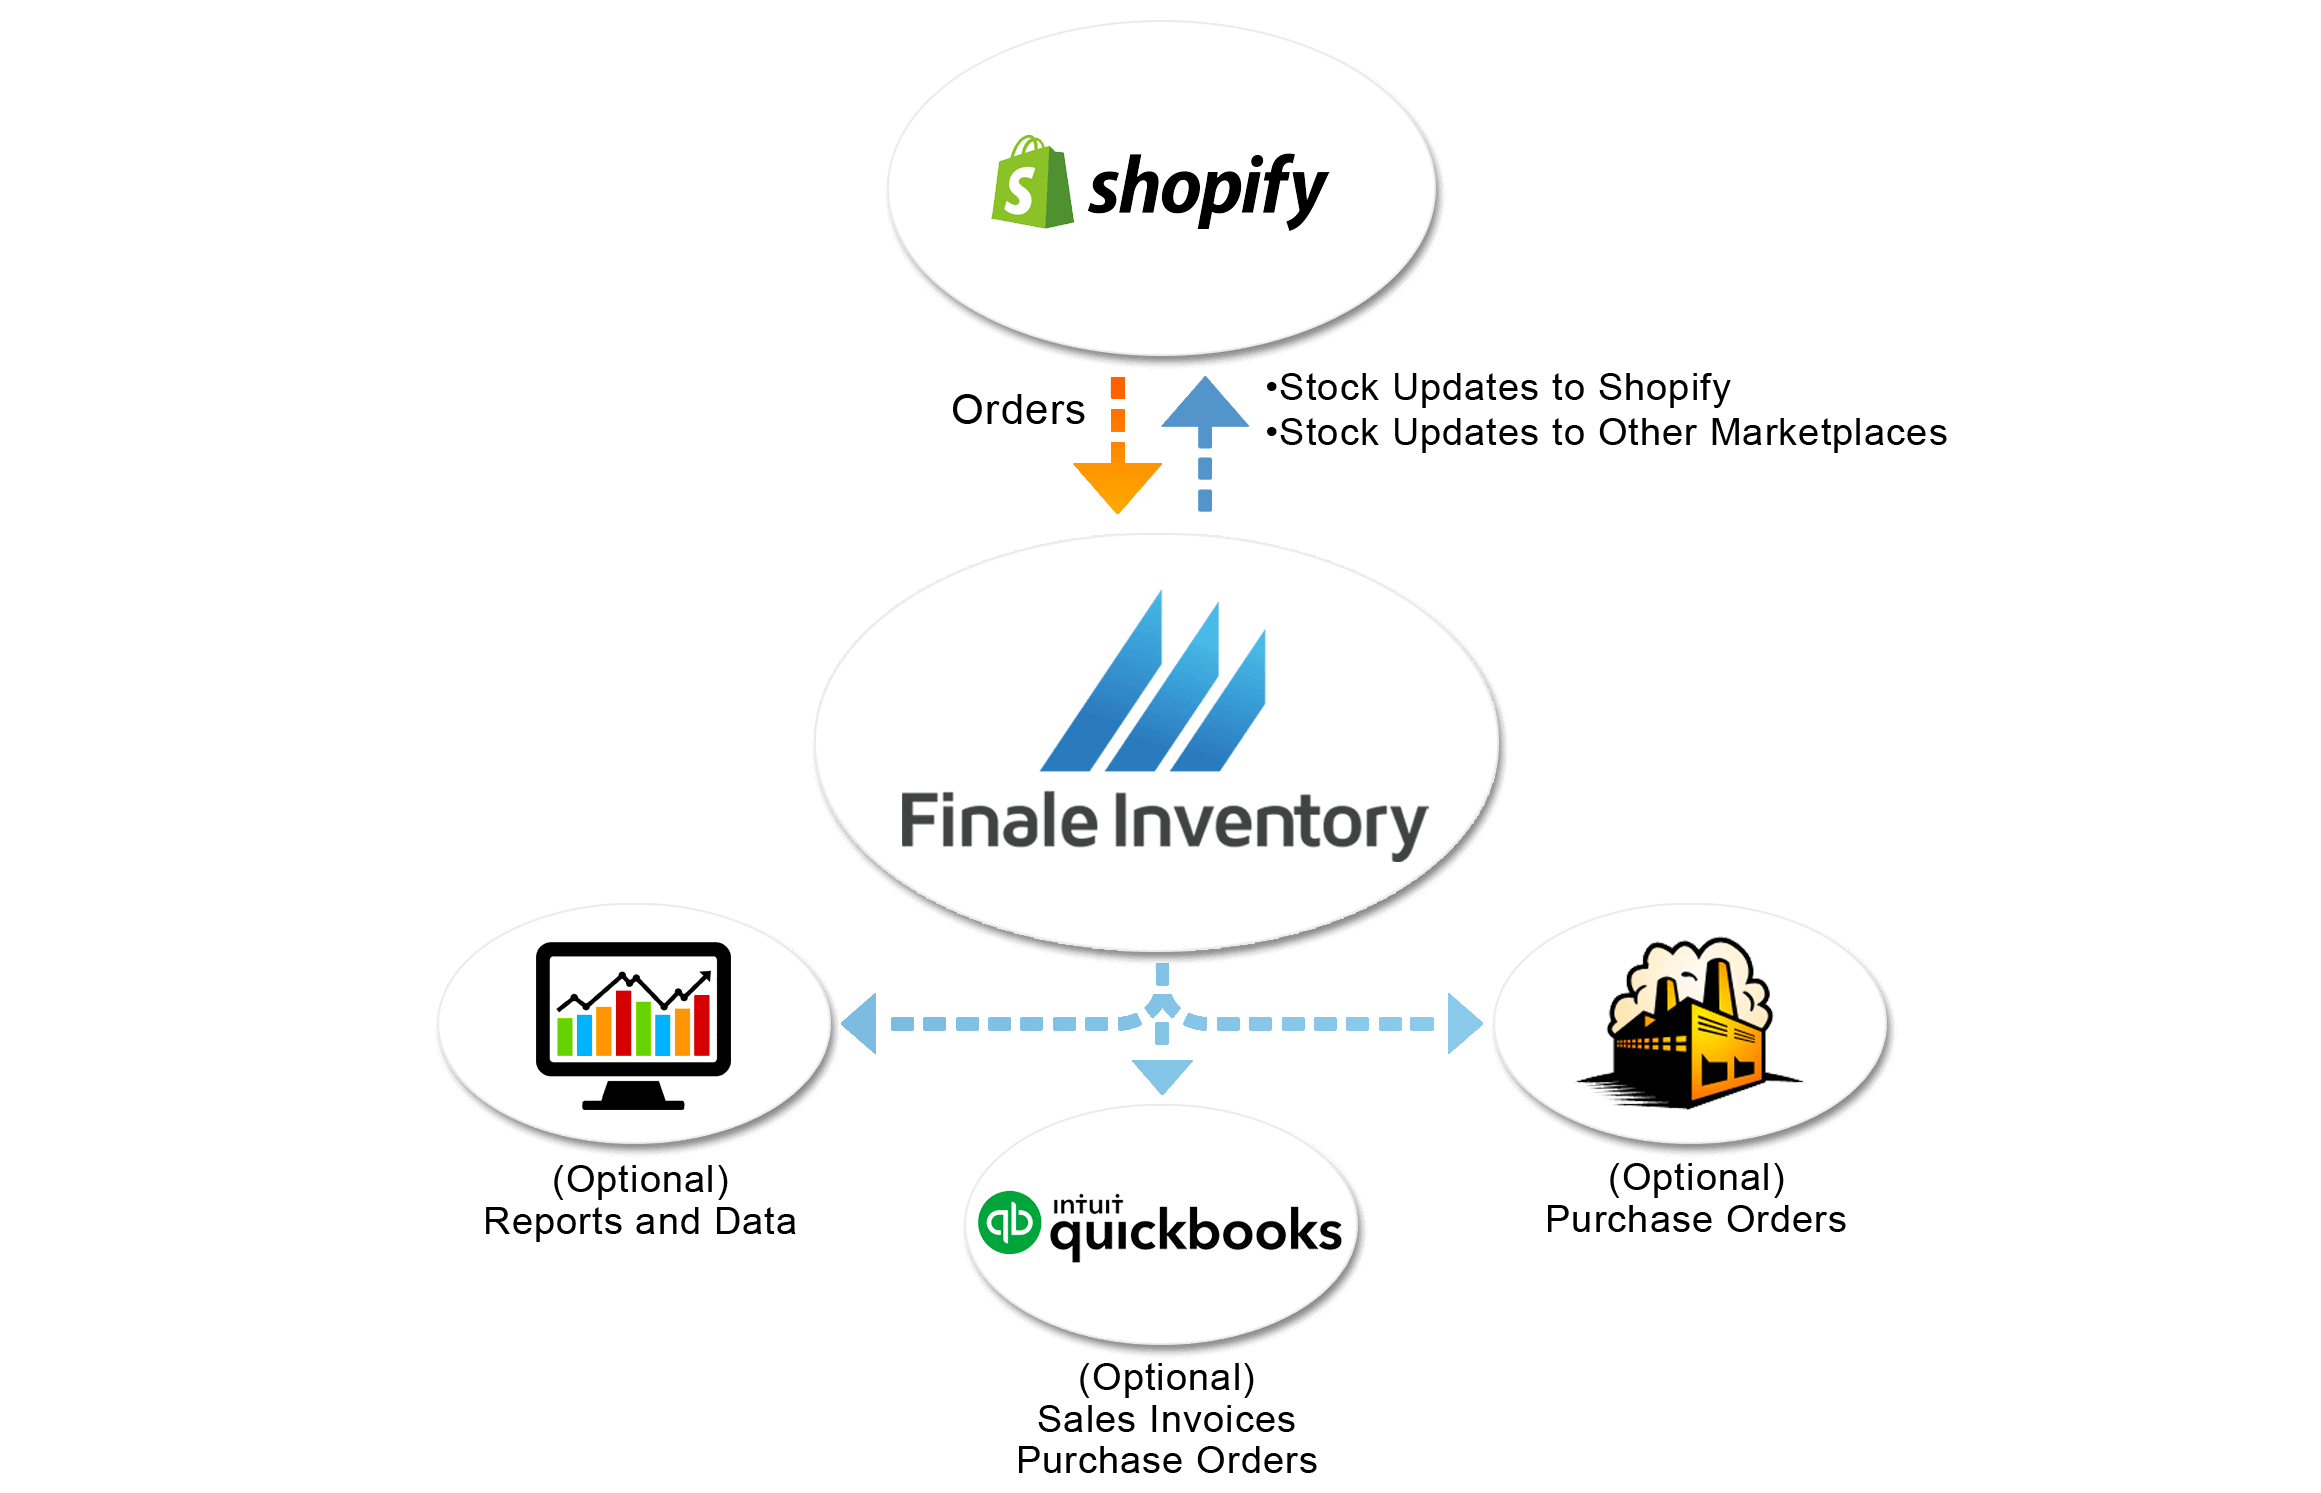 Shopify Finale Inventory inventory management software integration flow chart.